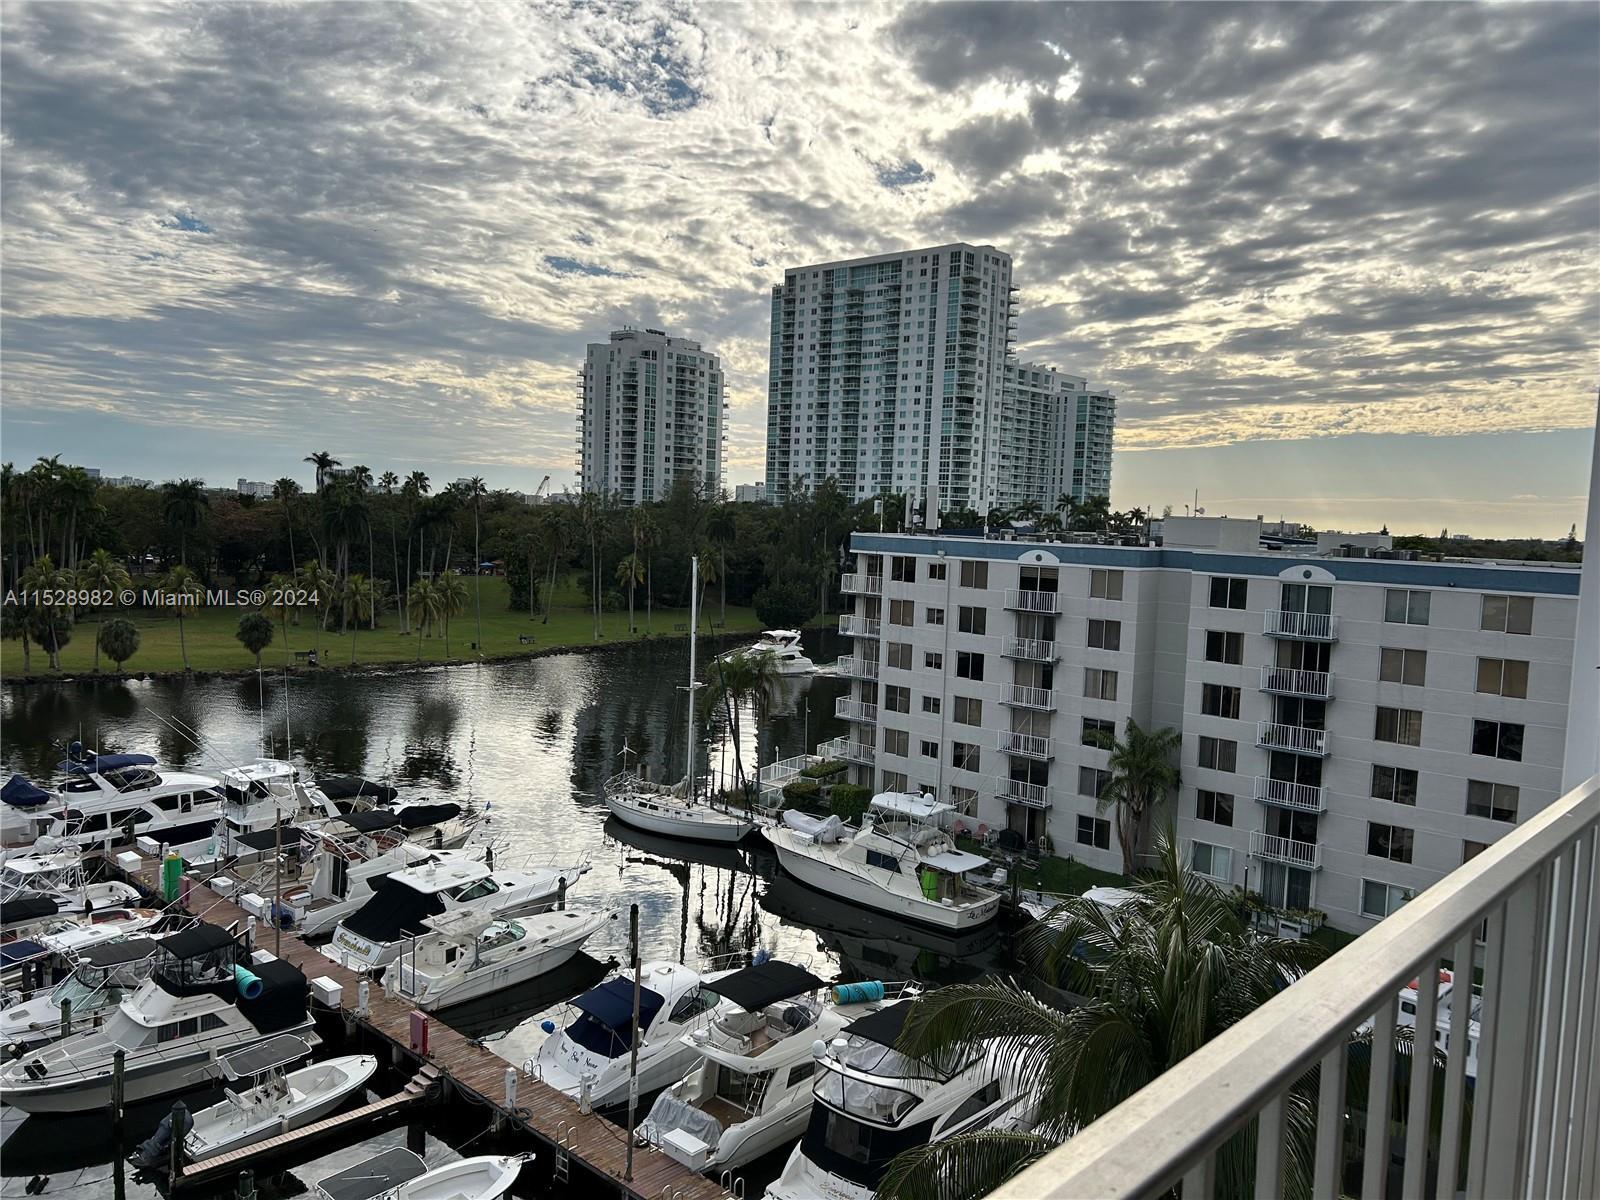 Photo of 1700 NW N River Dr #707 in Miami, FL